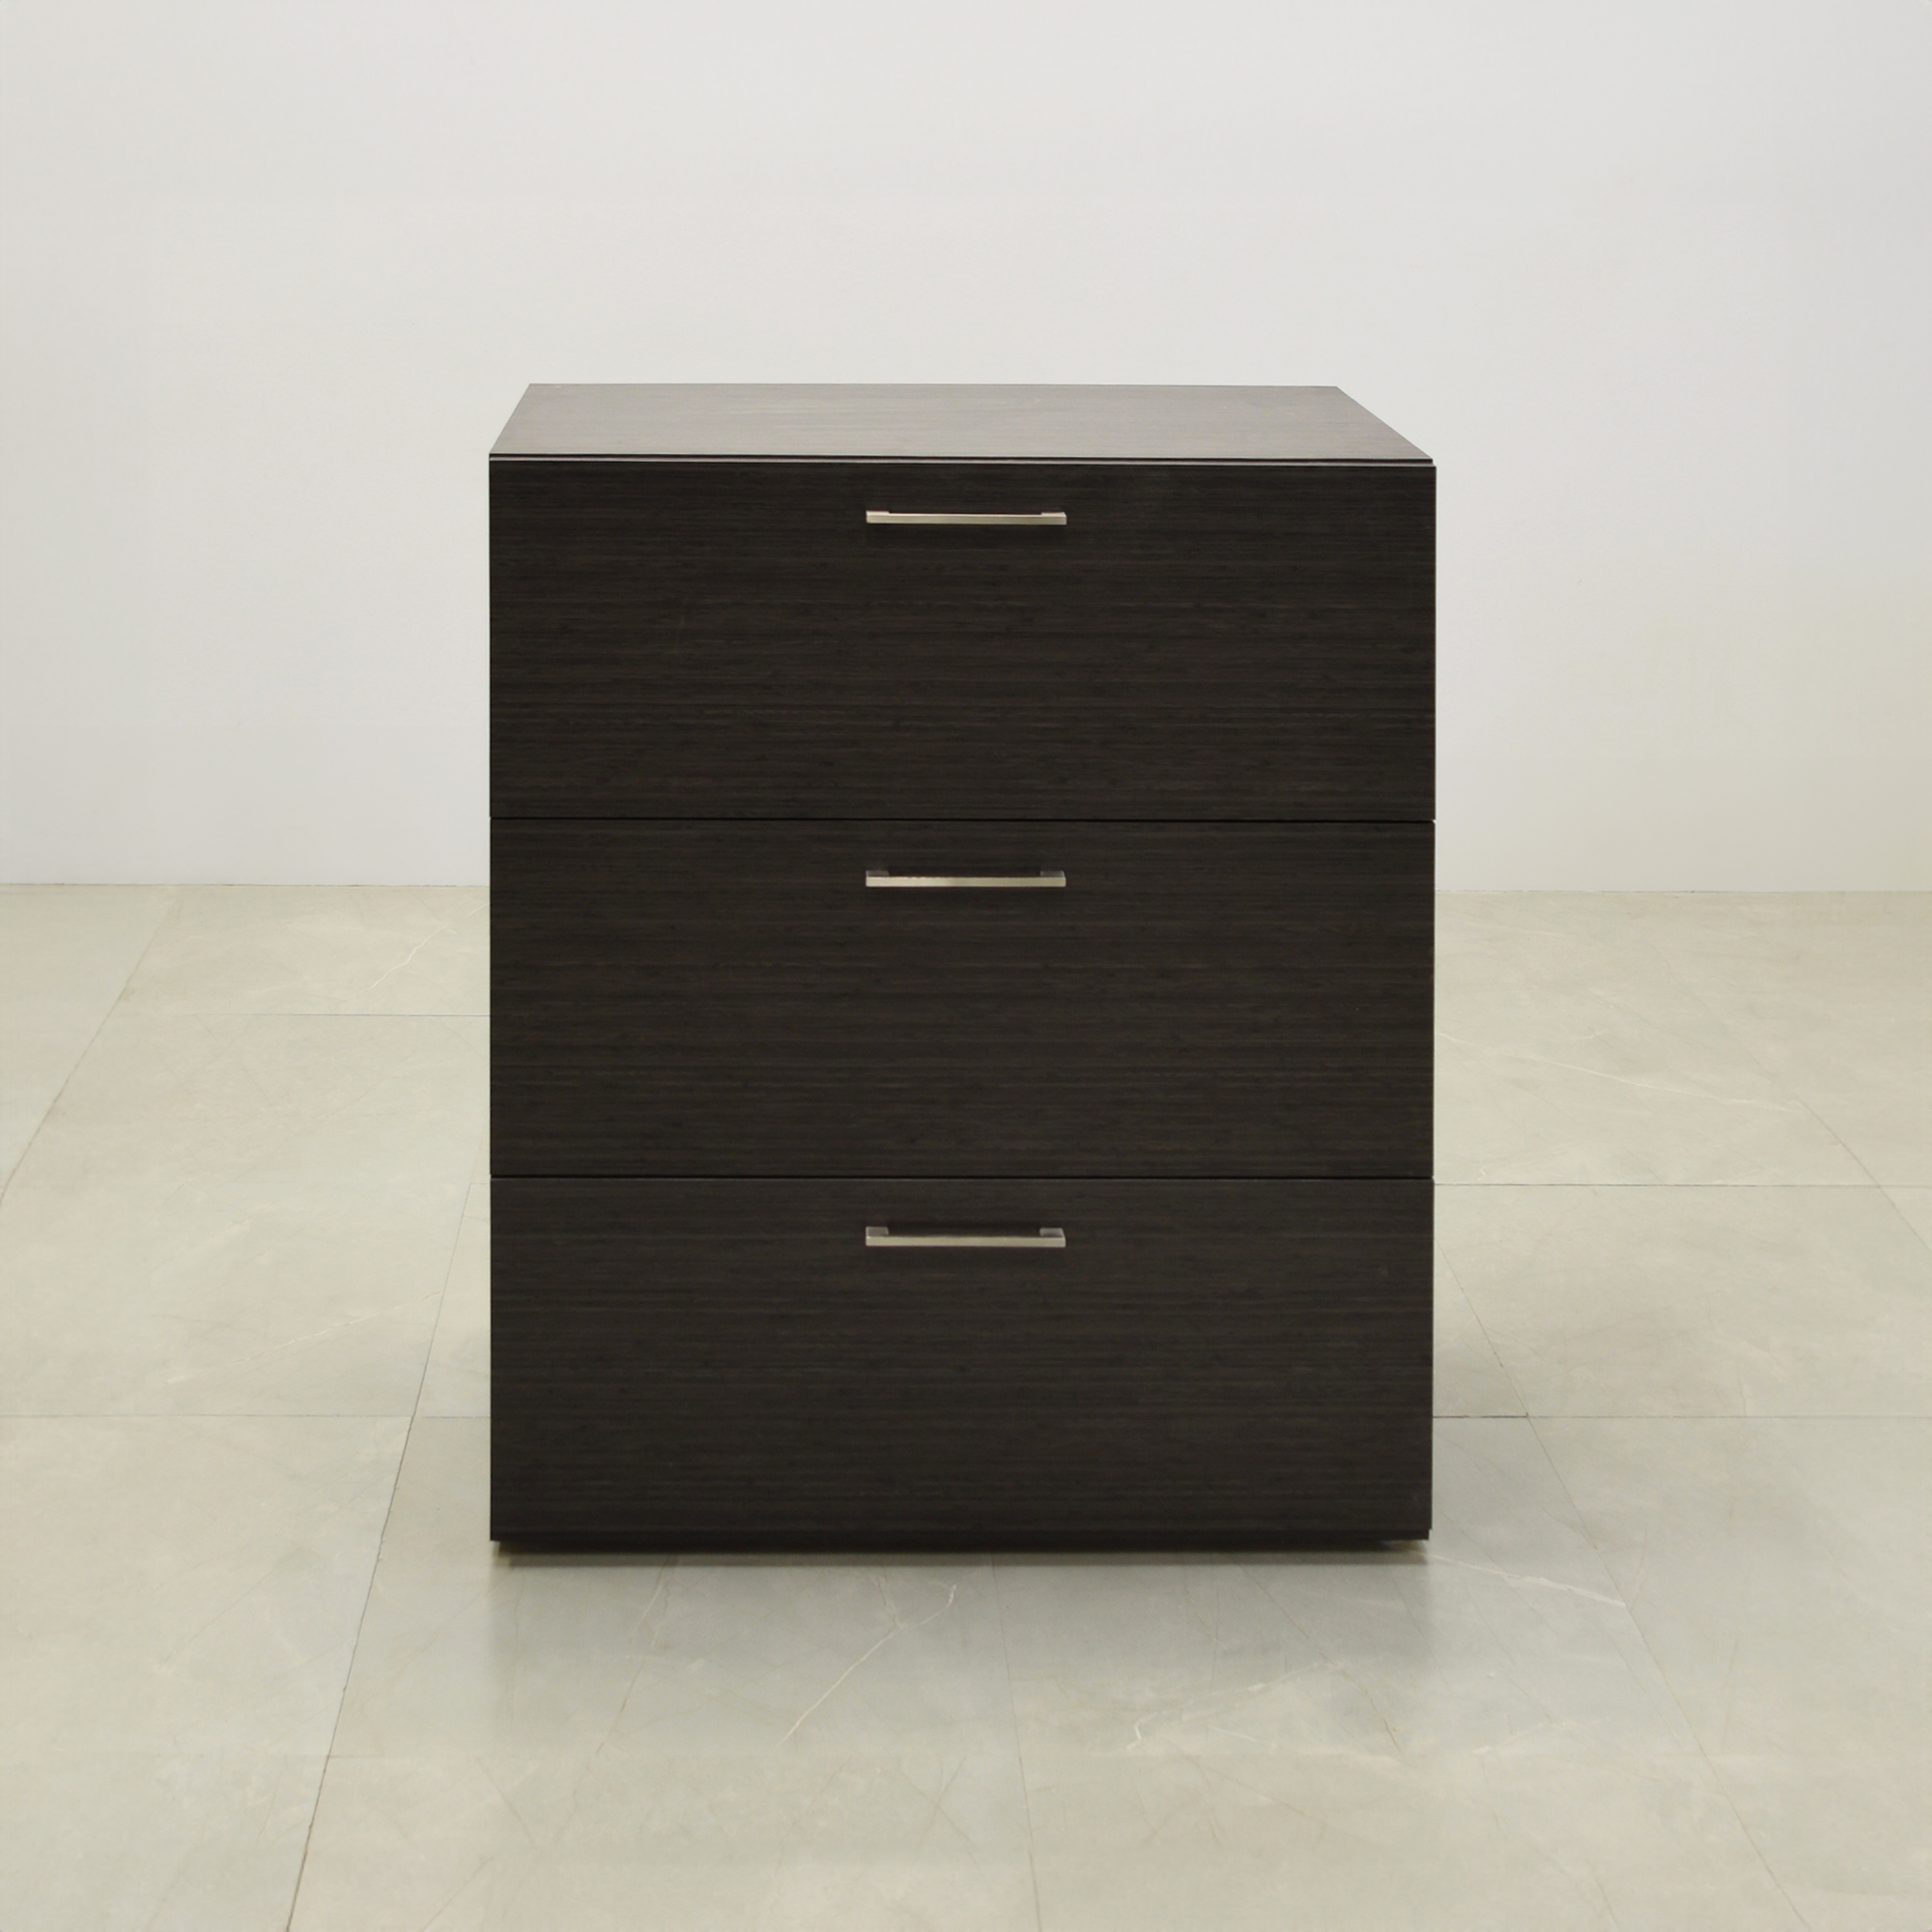 Naples Lateral File Cabinet in asian night (discontinued) laminate, shown here.